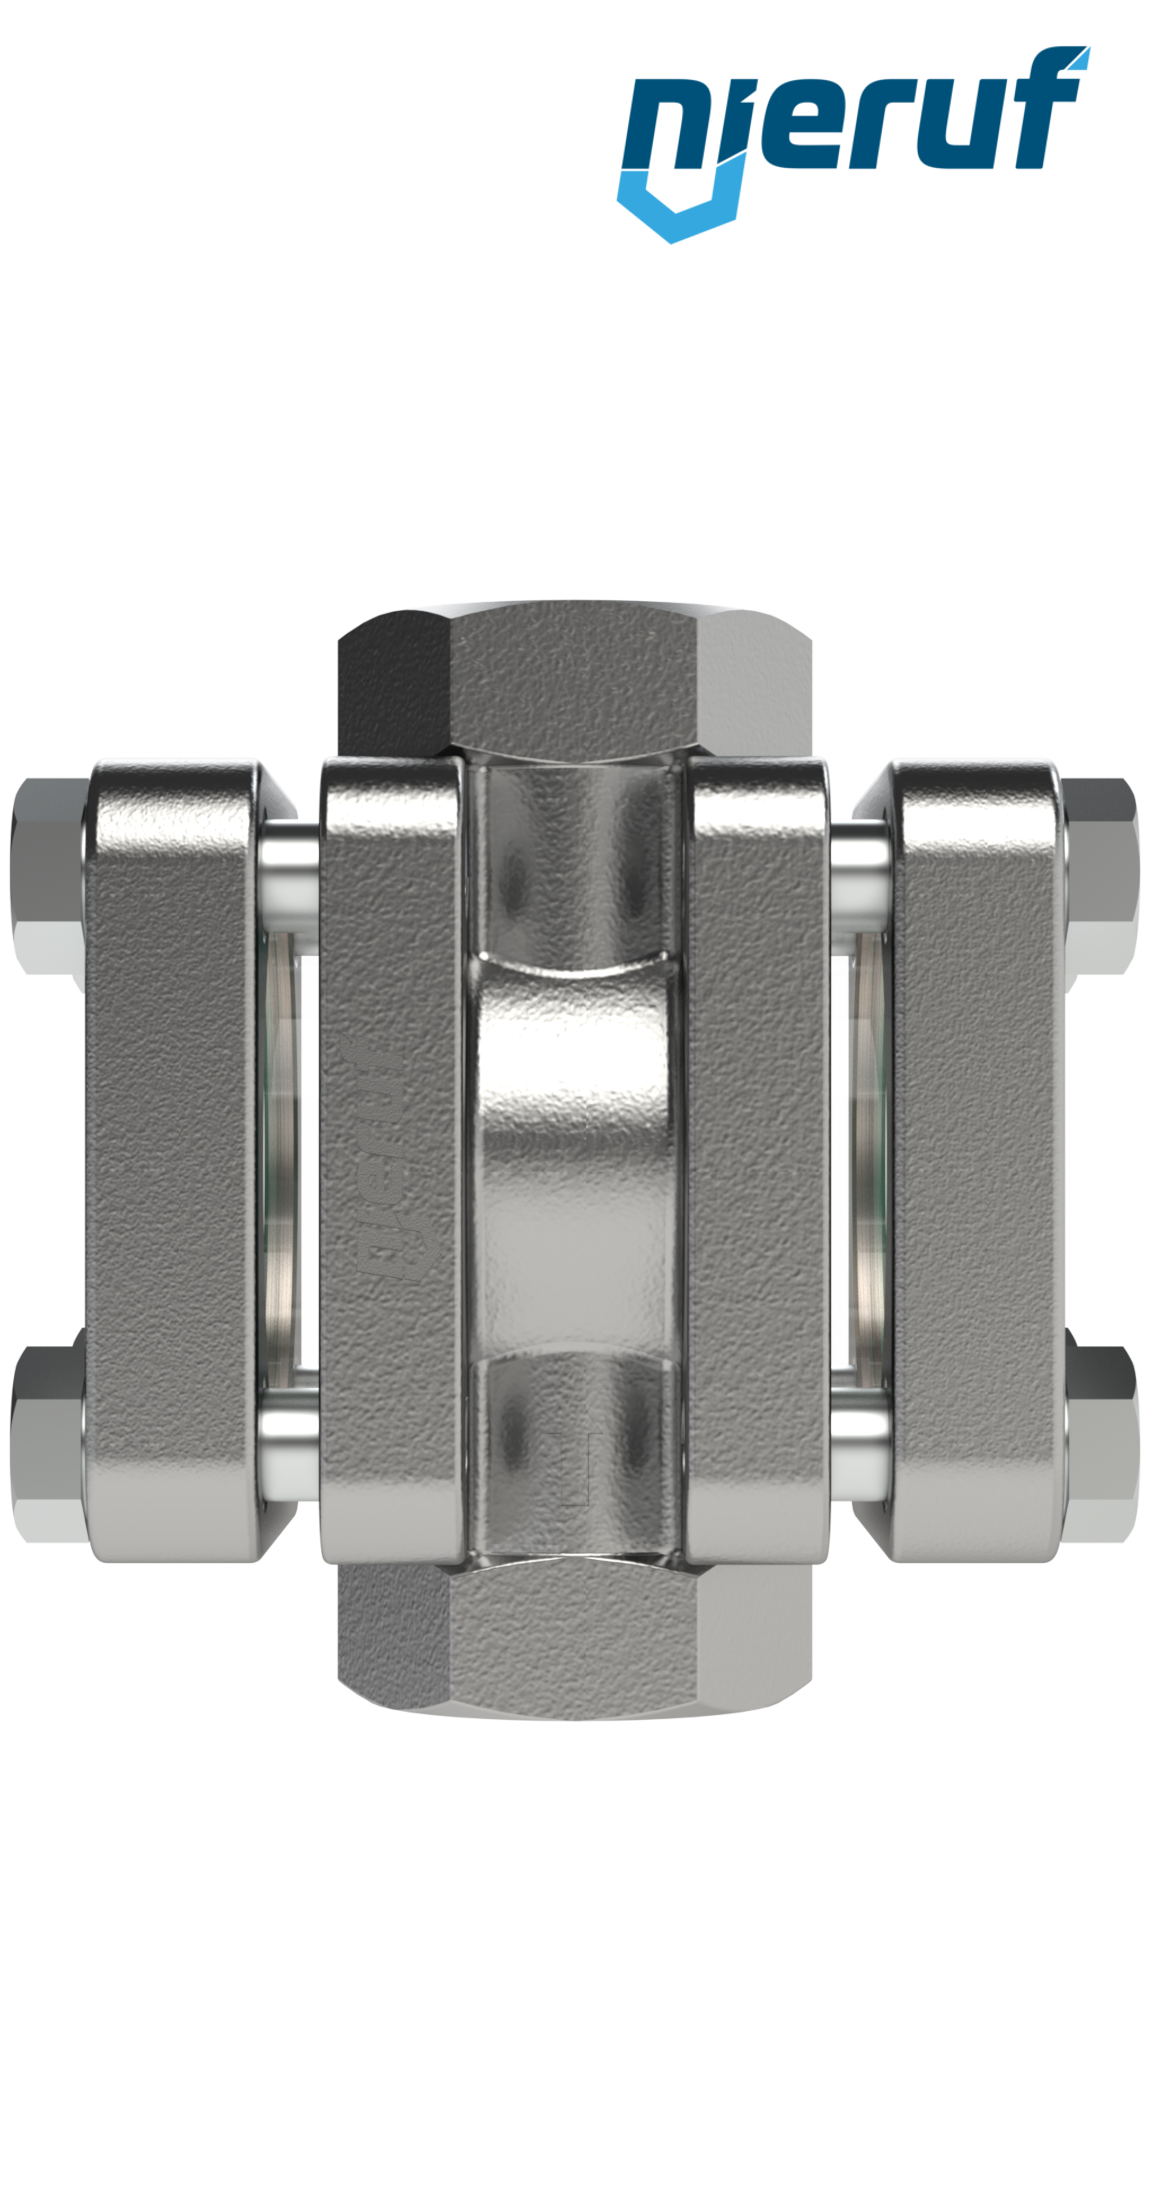 flow-through sight flow indicator DN40 - 1 1/2" Inch stainless steel borosilicate glass design with disc